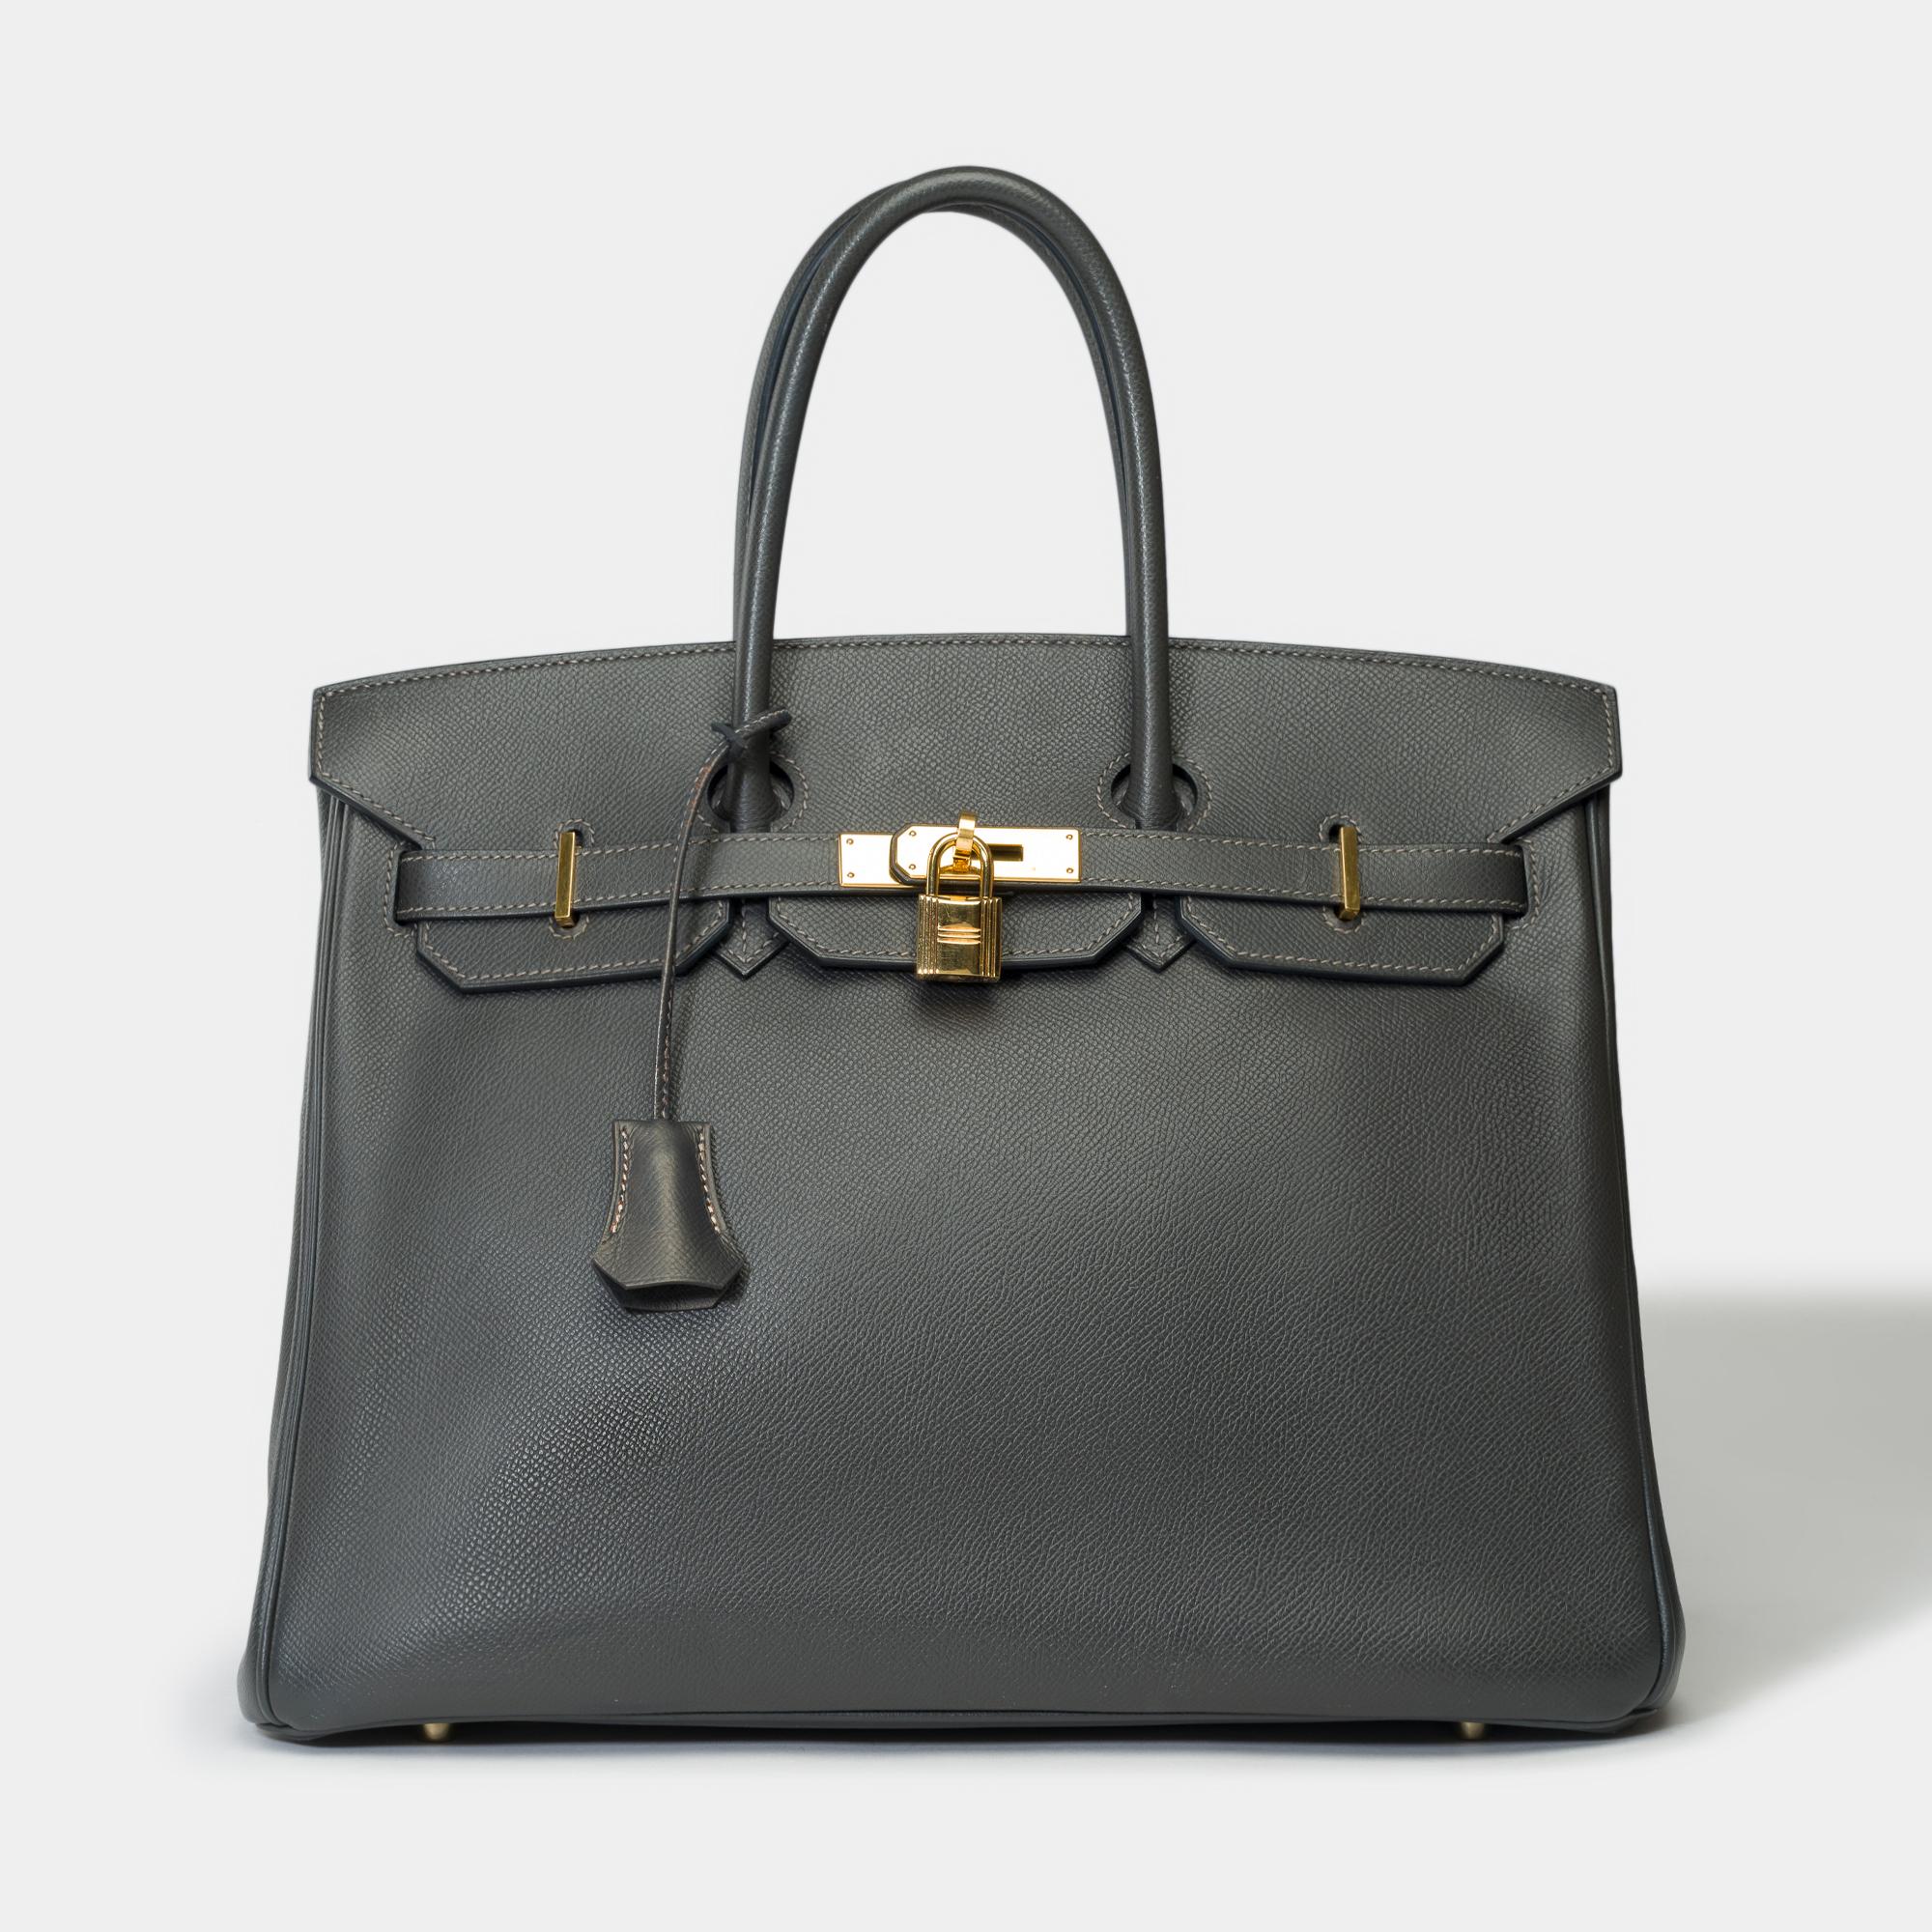 Amazing​ ​Hermes​ ​Birkin​ ​35​ ​handbag​ ​in​ ​Gray​ ​Graphite​ ​Epsom​ ​leather,​ ​gold​ ​plated​ ​metal​ ​trim​ ​,​ ​double​ ​handle​ ​in​ ​gray​ ​leather​ ​allowing​ ​a​ ​hand​ ​carry

Flap​ ​closure
Grey​ ​leather​ ​inner​ ​lining,​ ​one​